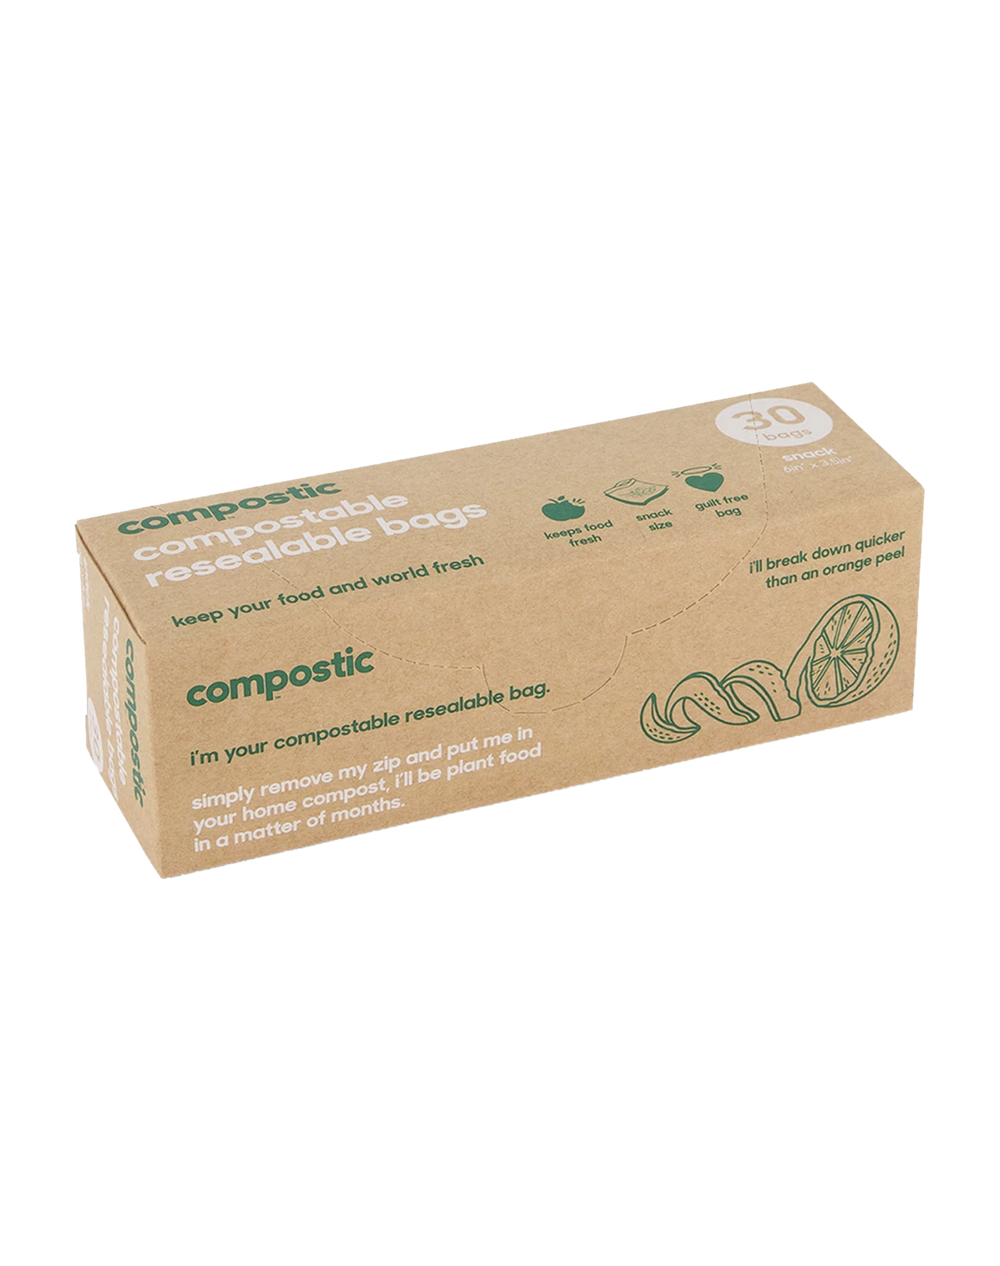 Compostable Snack Bags, Compostic Compostic